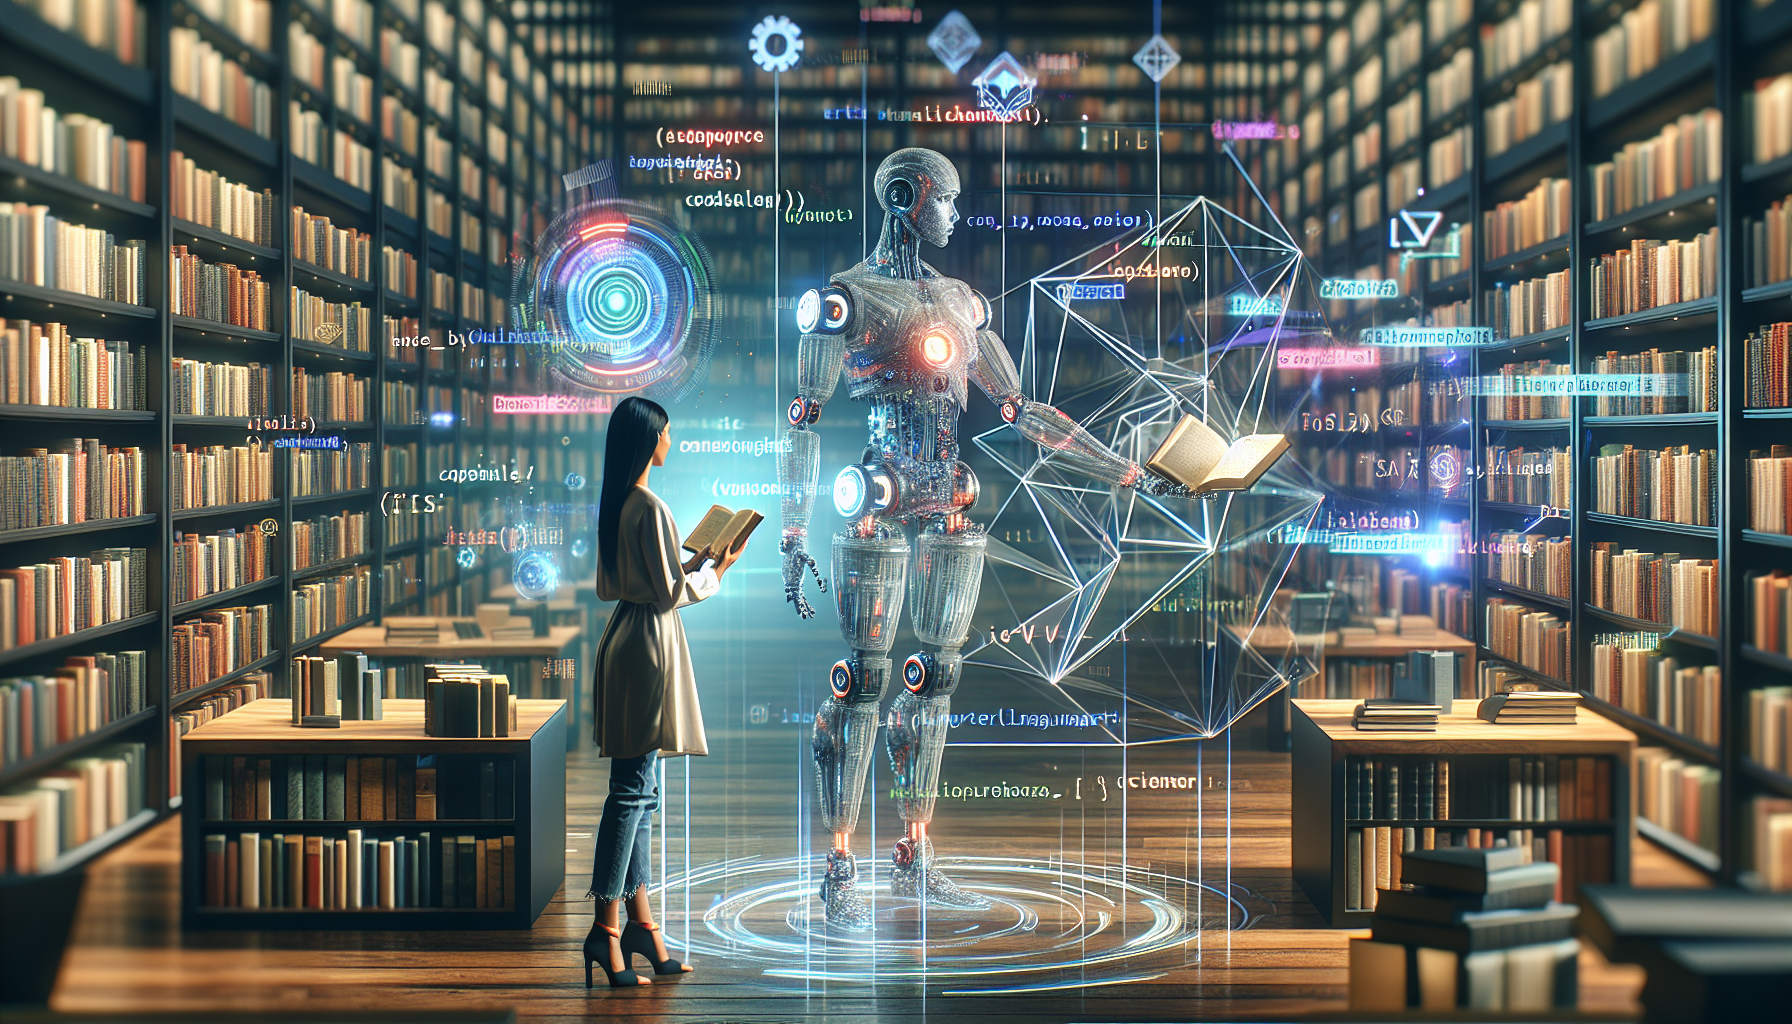 An image of a futuristic, spacious library filled with books and digital screens, where a humanoid robot and a human are collaboratively writing a script on a holographic interface, surrounded by floa